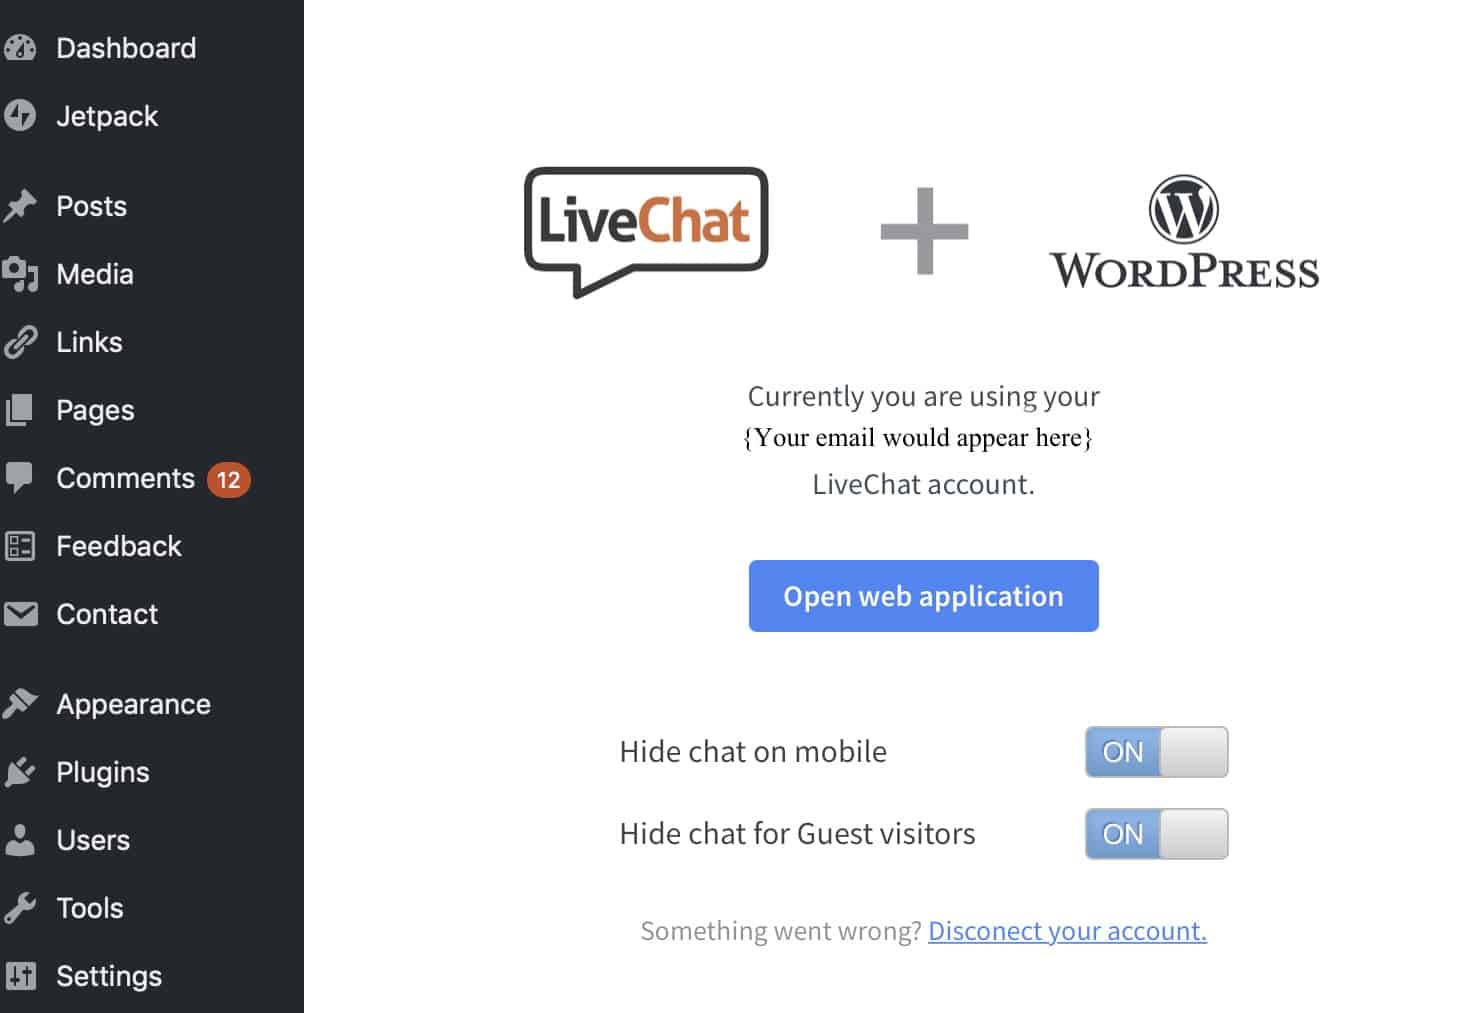 Integrating LiveChat with WordPress